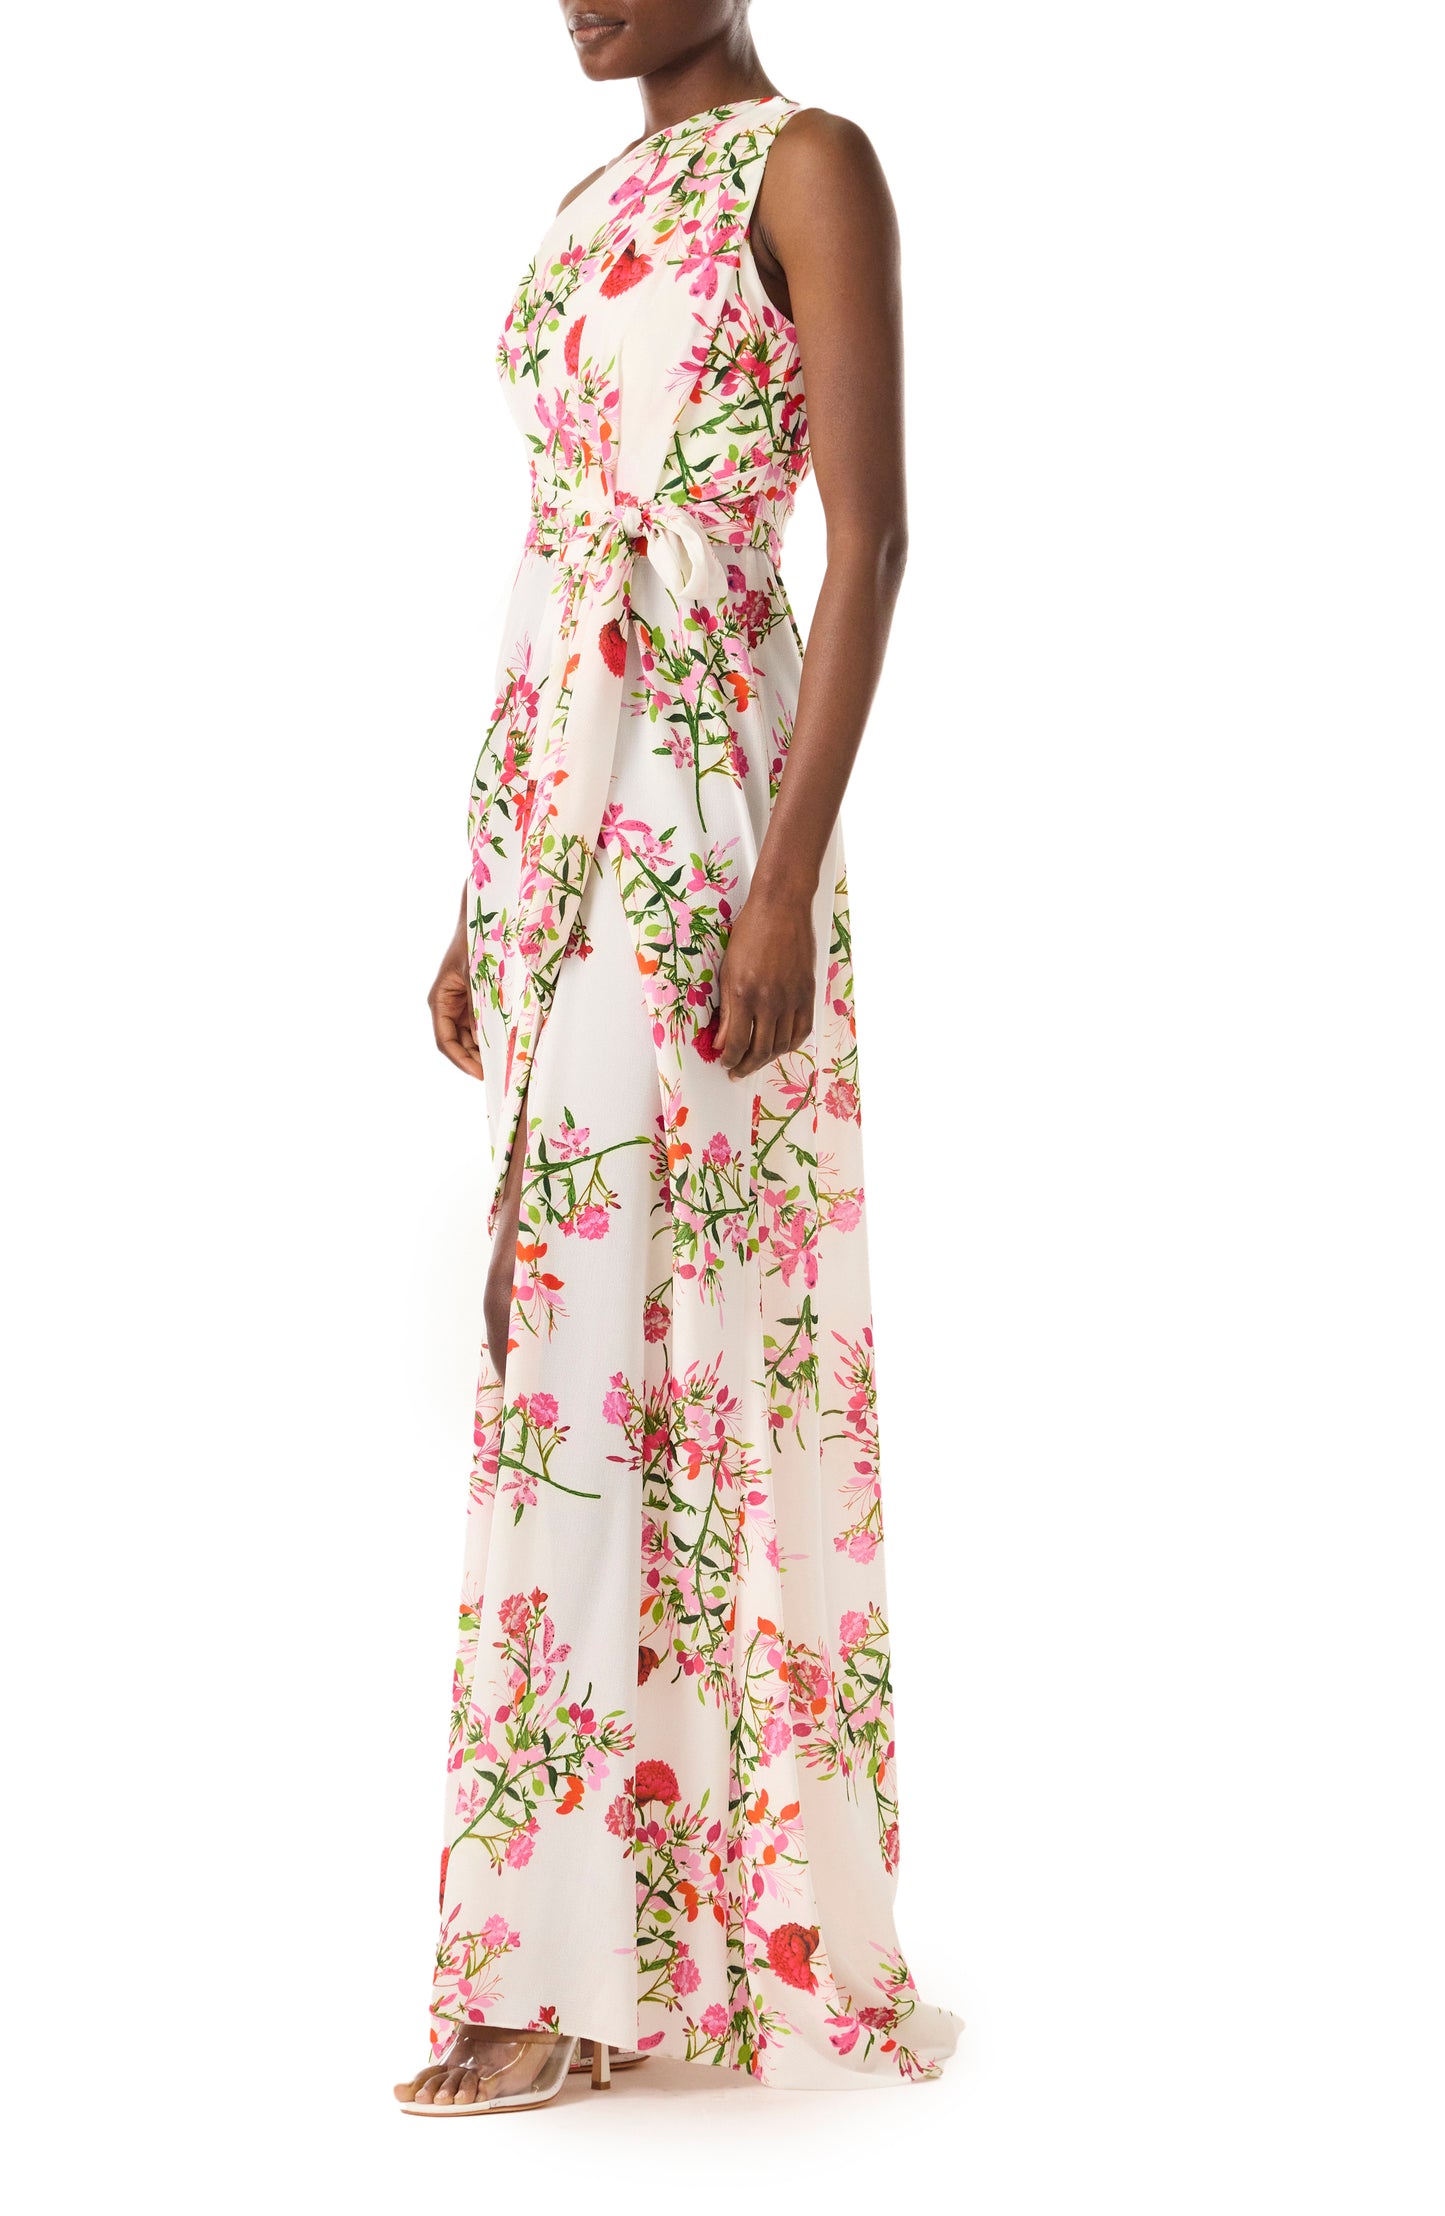 Monique Lhuillier One shoulder draped gown with self-tie belt and high front slit in Silk White Fuchsia floral printed crepe - side.